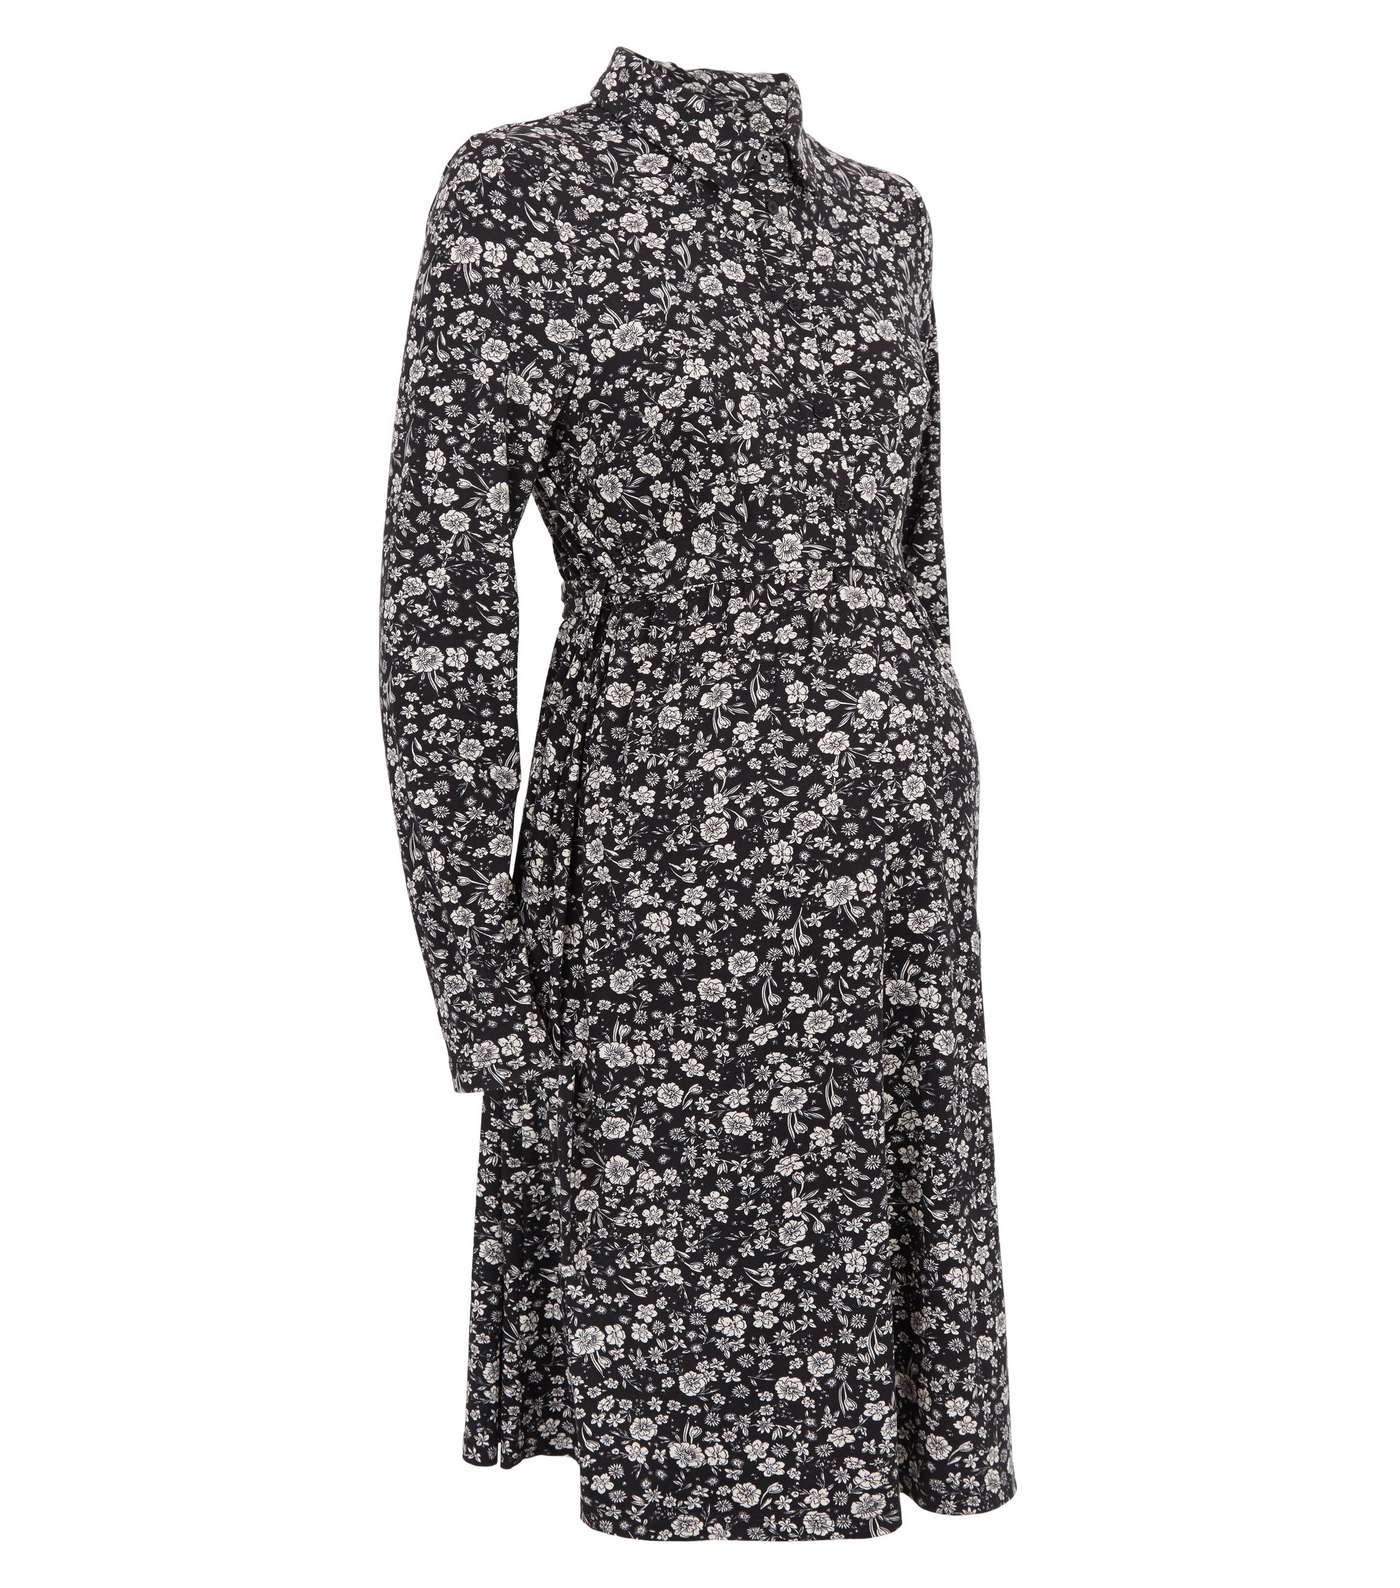 Maternity Black Floral Soft Touch Shirt Dress Image 4